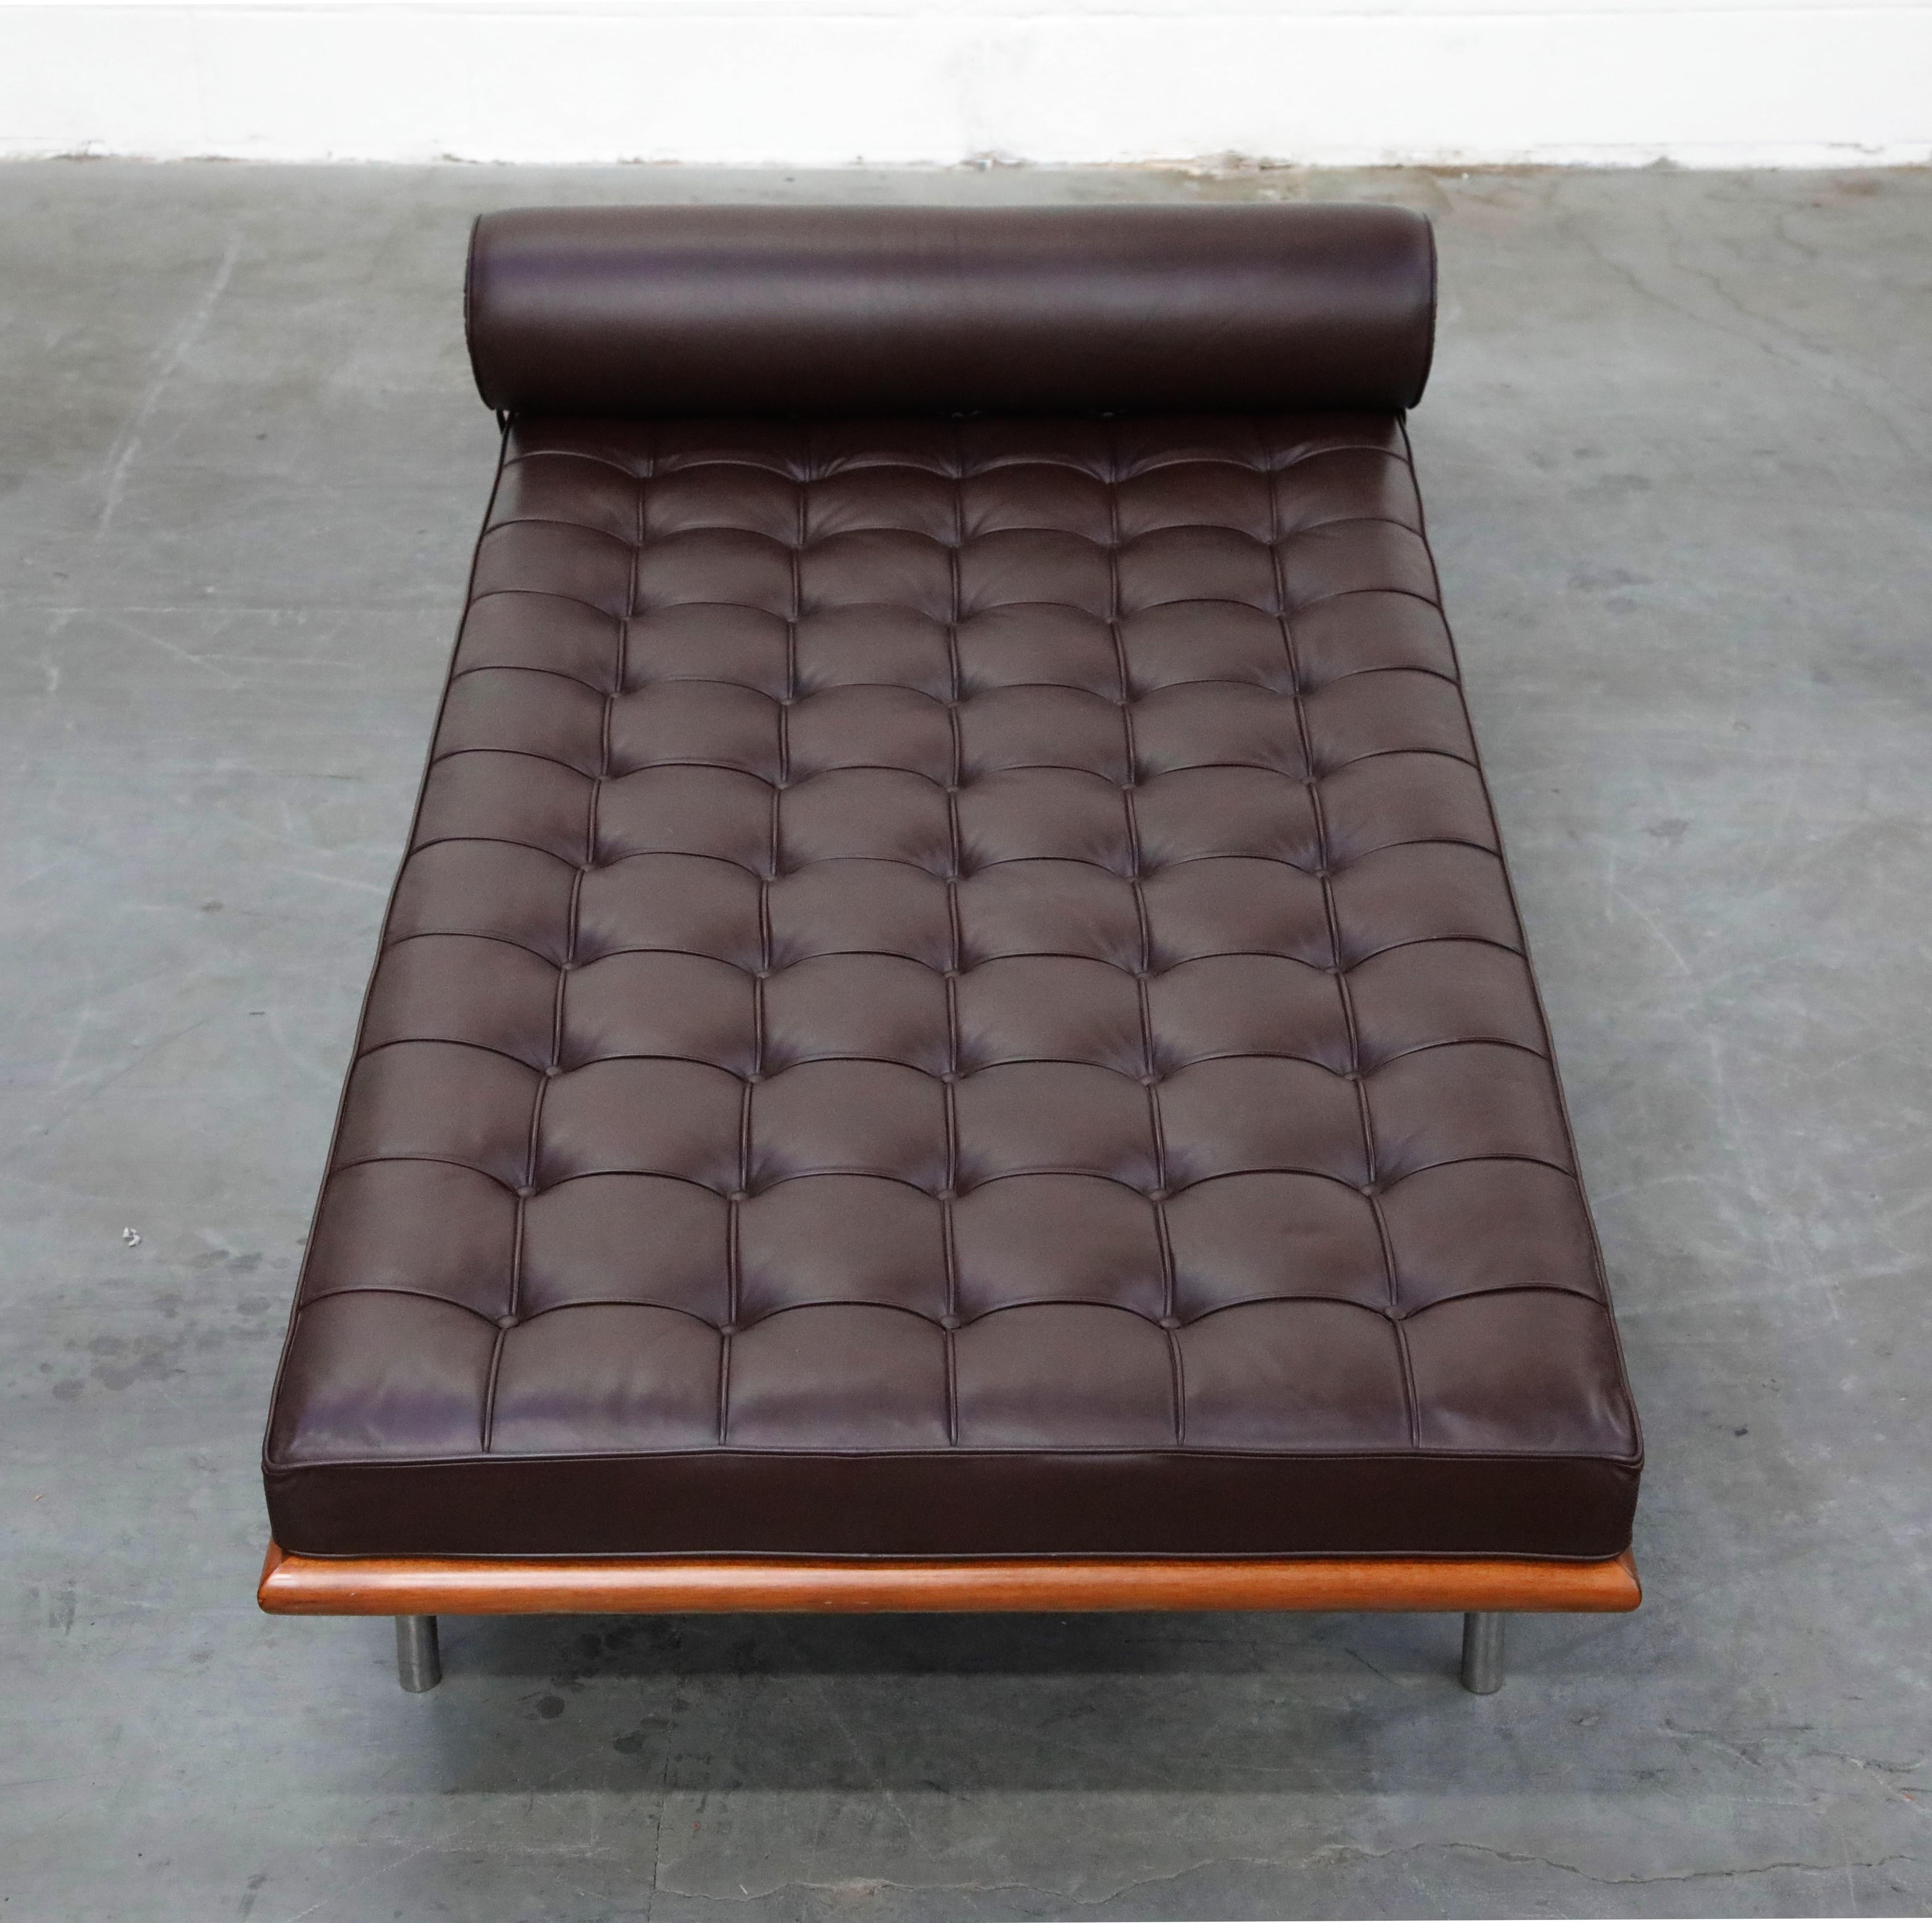 Contemporary Barcelona Daybed by Mies Van Der Rohe for Knoll in Dark Brown Leather, Signed